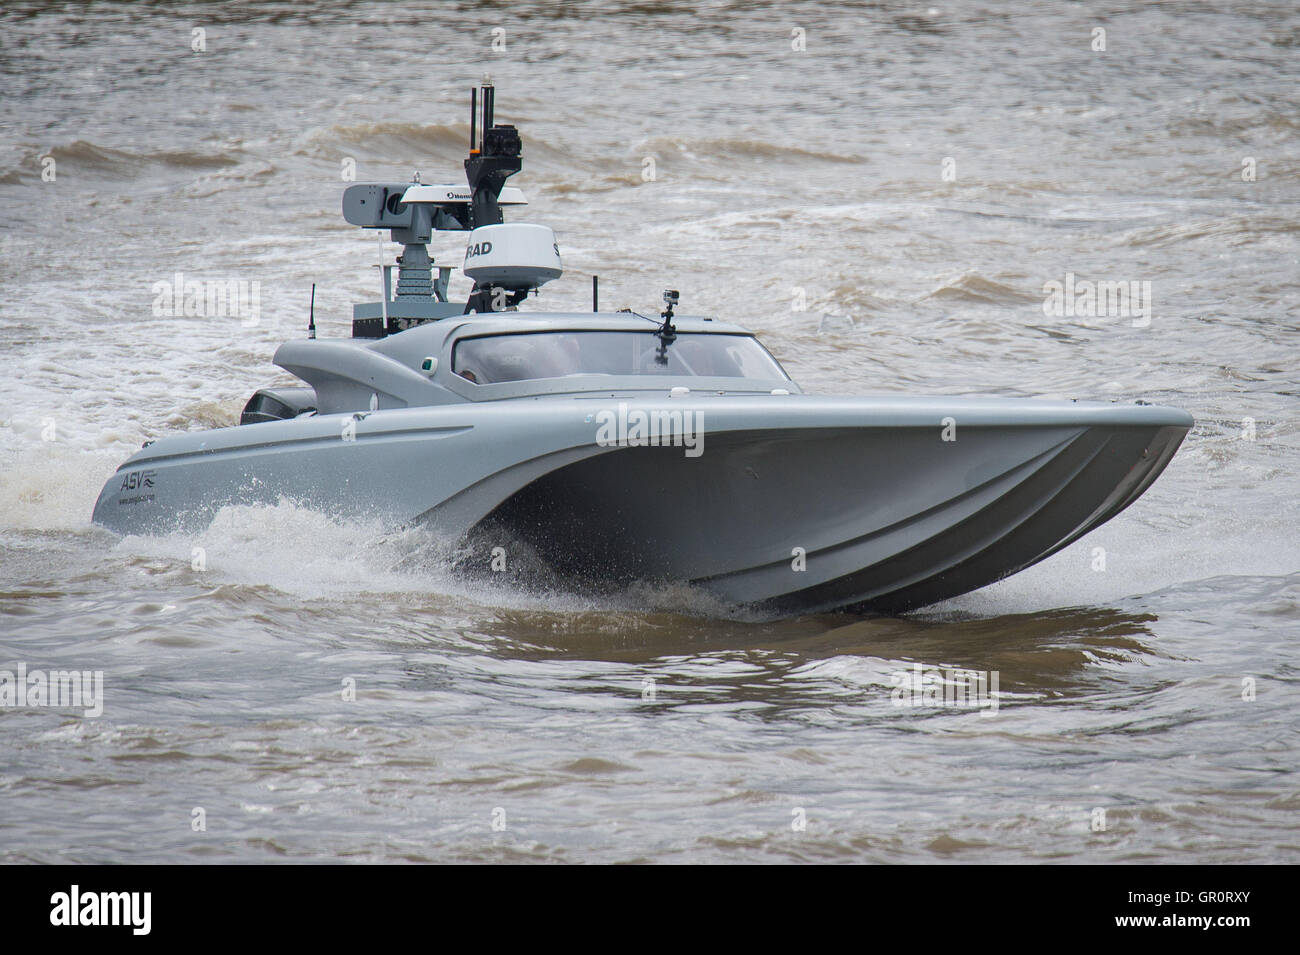 The Maritime Autonomy Surface Testbed (MAST), an unmanned surface vessel (USV) is tested on the River Thames, London, as part of preparations for the Royal Navy's 'Unmanned Warrior' test program this autumn. Stock Photo